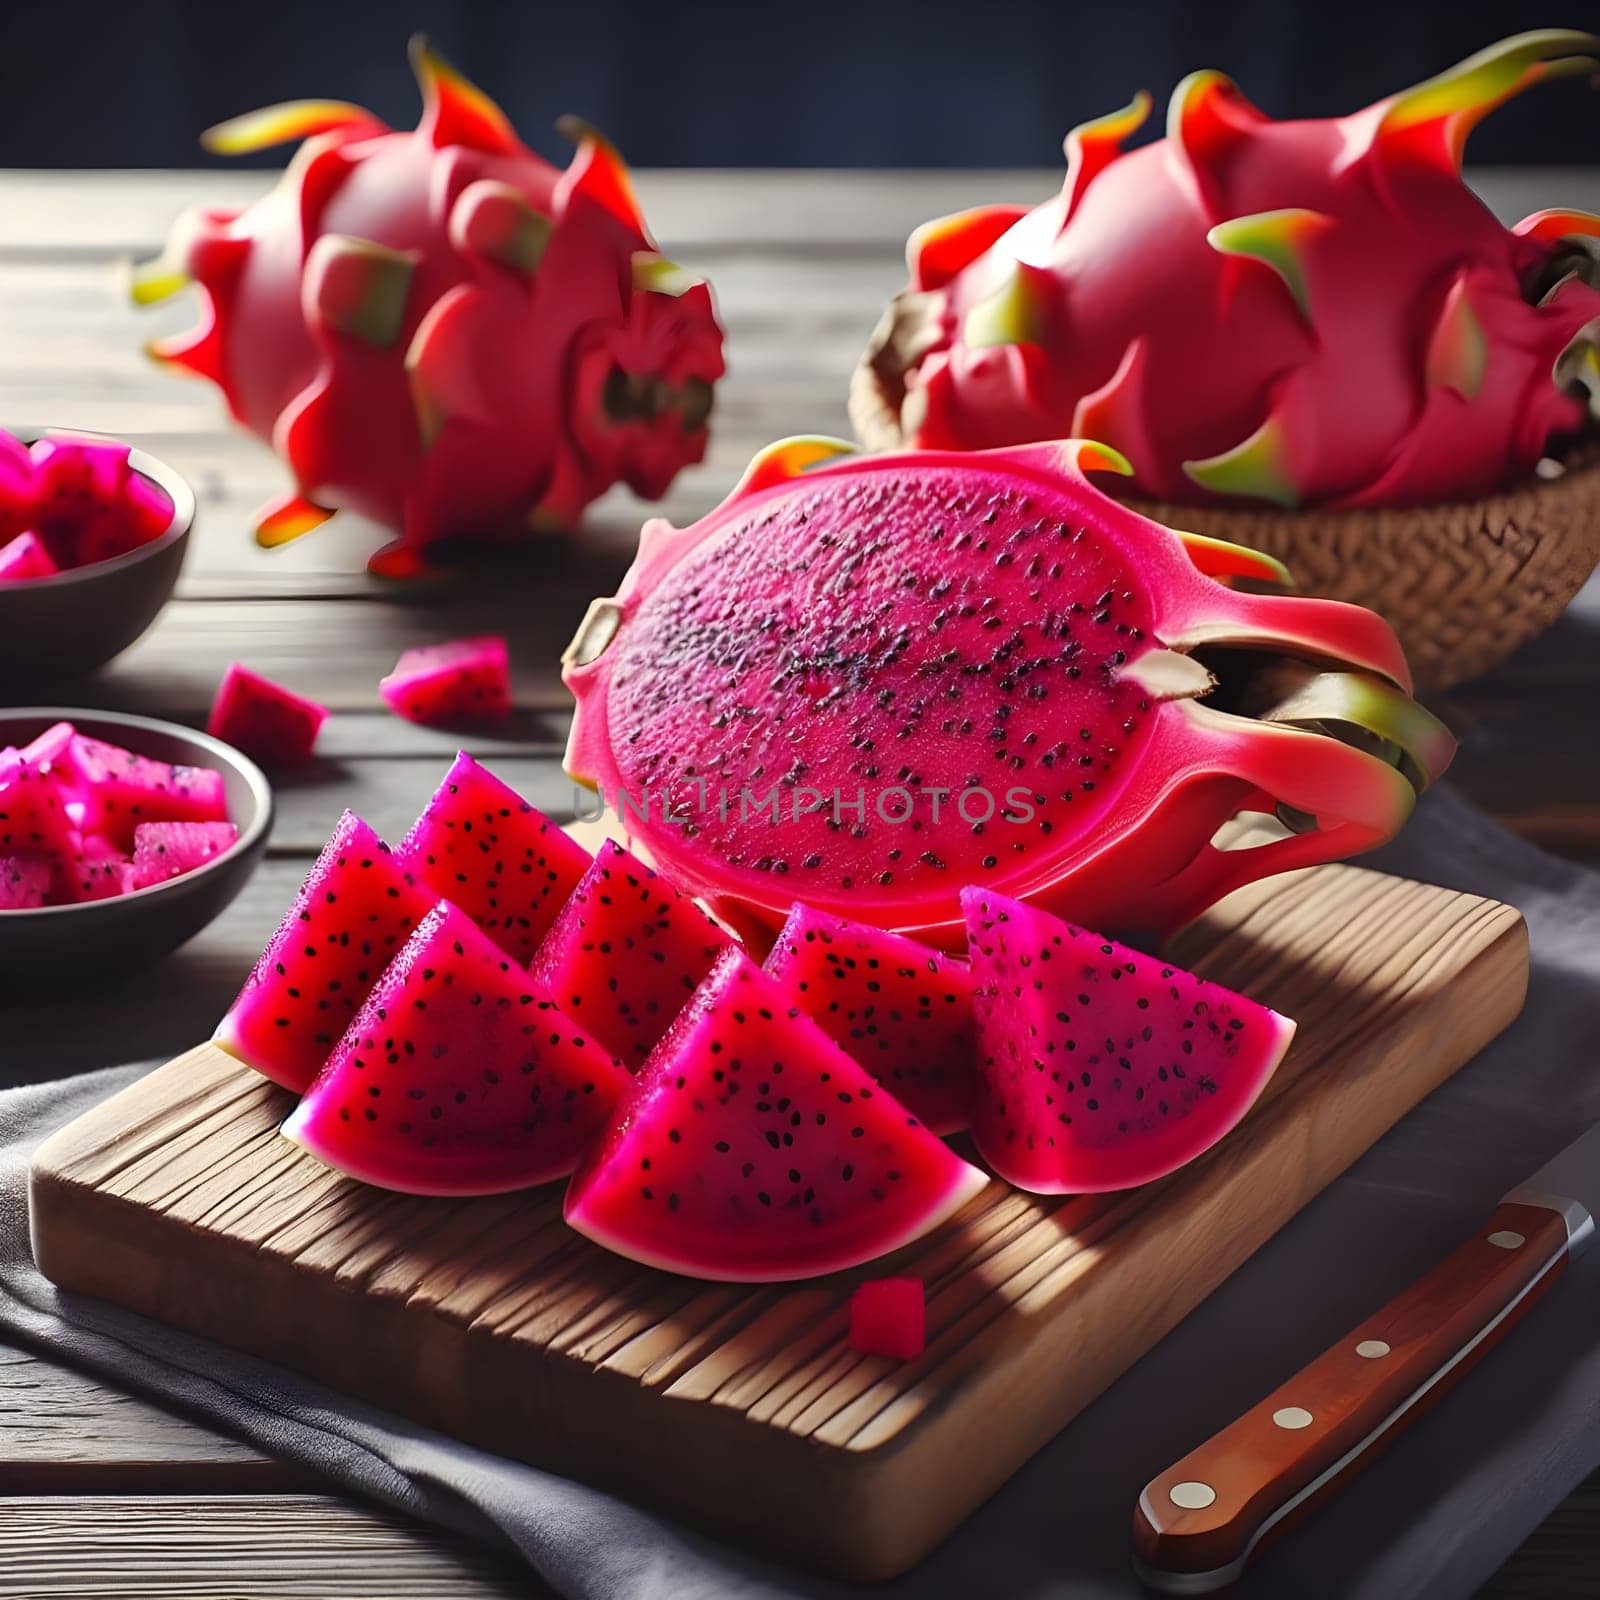 Cutting slices of Dragon fruit on wooden surface